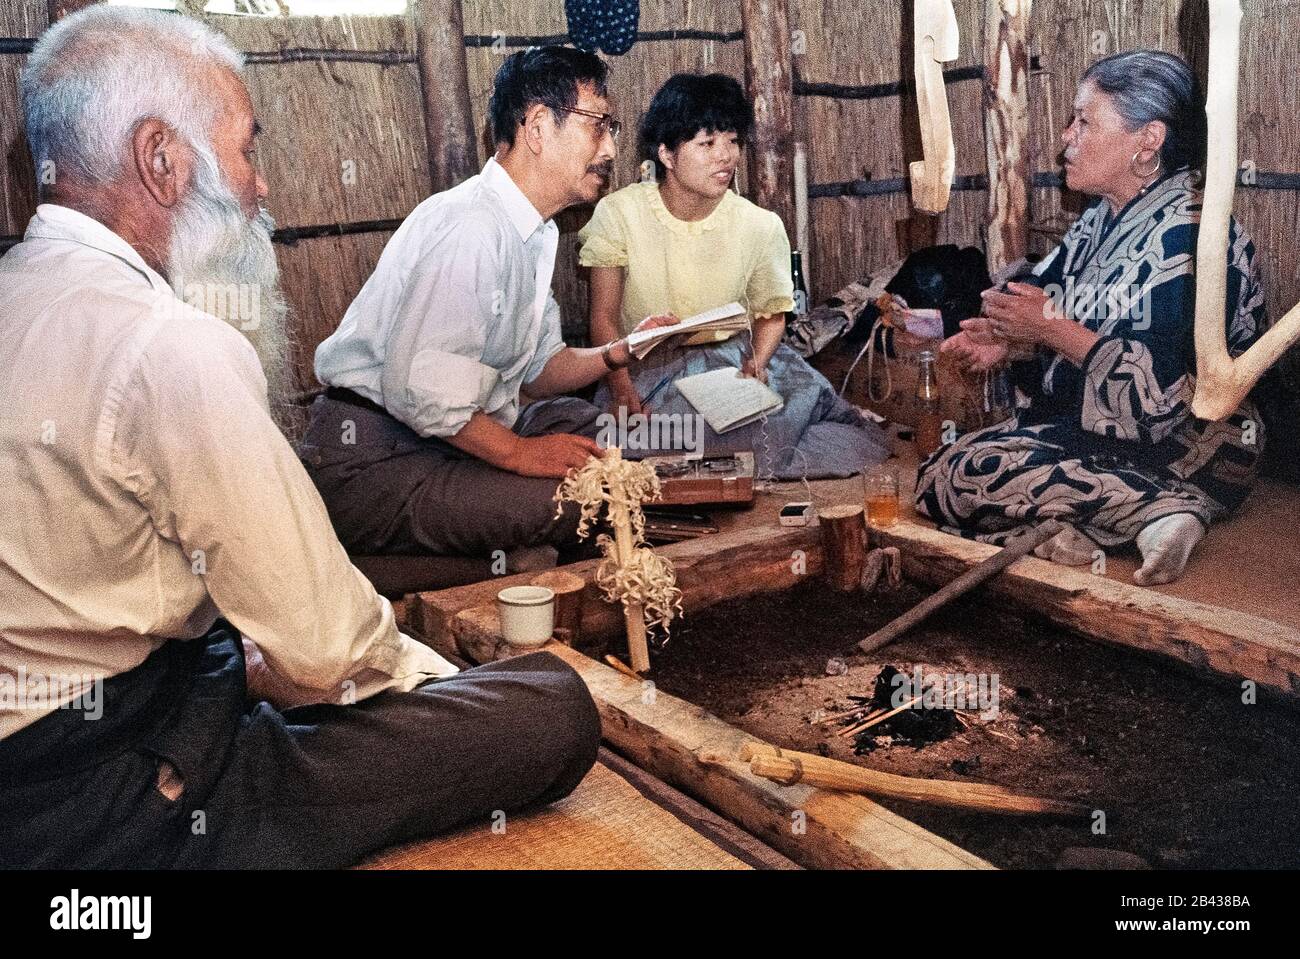 Japanese linguist Professor Kyosuke Kindaichi and his female assistant interview an elderly Ainu woman in traditional dress as her bearded husband listens to her stories inside their native home on the island of Hokkaido in northern Japan. They were two of only 300 pure-blooded Ainu (pronounced I-noo) still living when this historical photograph was taken in 1962. Since that time the Ainu have assimilated into Japanese society and their age-old way of life is only glimpsed today in special tourist villages. The Ainu were officially recognized as indigenous people of Japan in 2008. Stock Photo